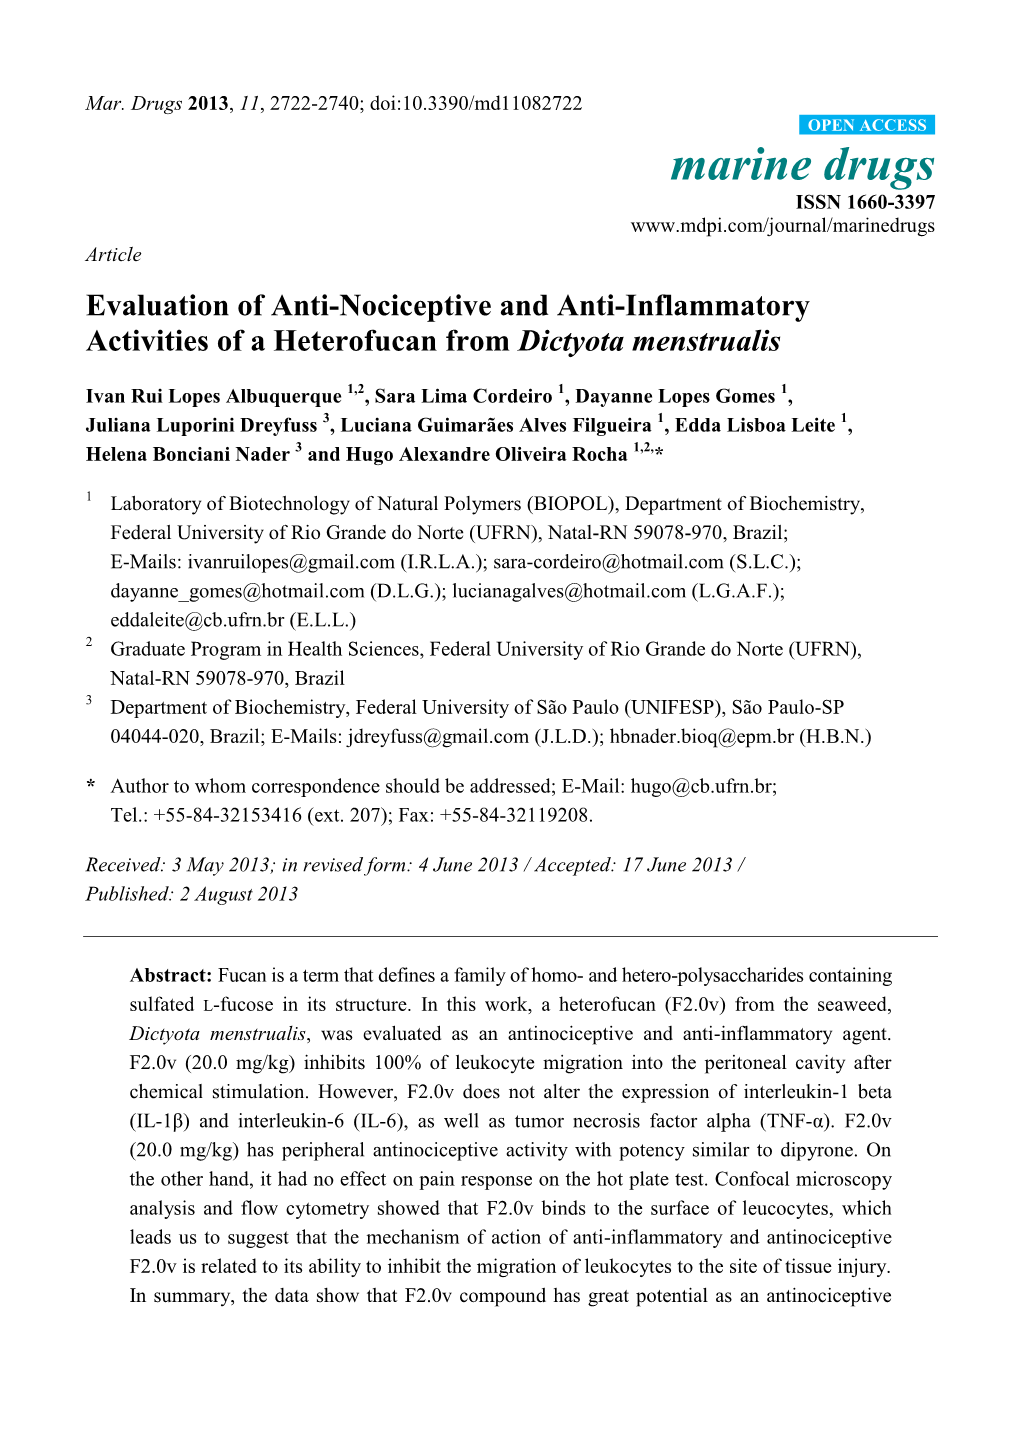 Evaluation of Anti-Nociceptive and Anti-Inflammatory Activities of a Heterofucan from Dictyota Menstrualis